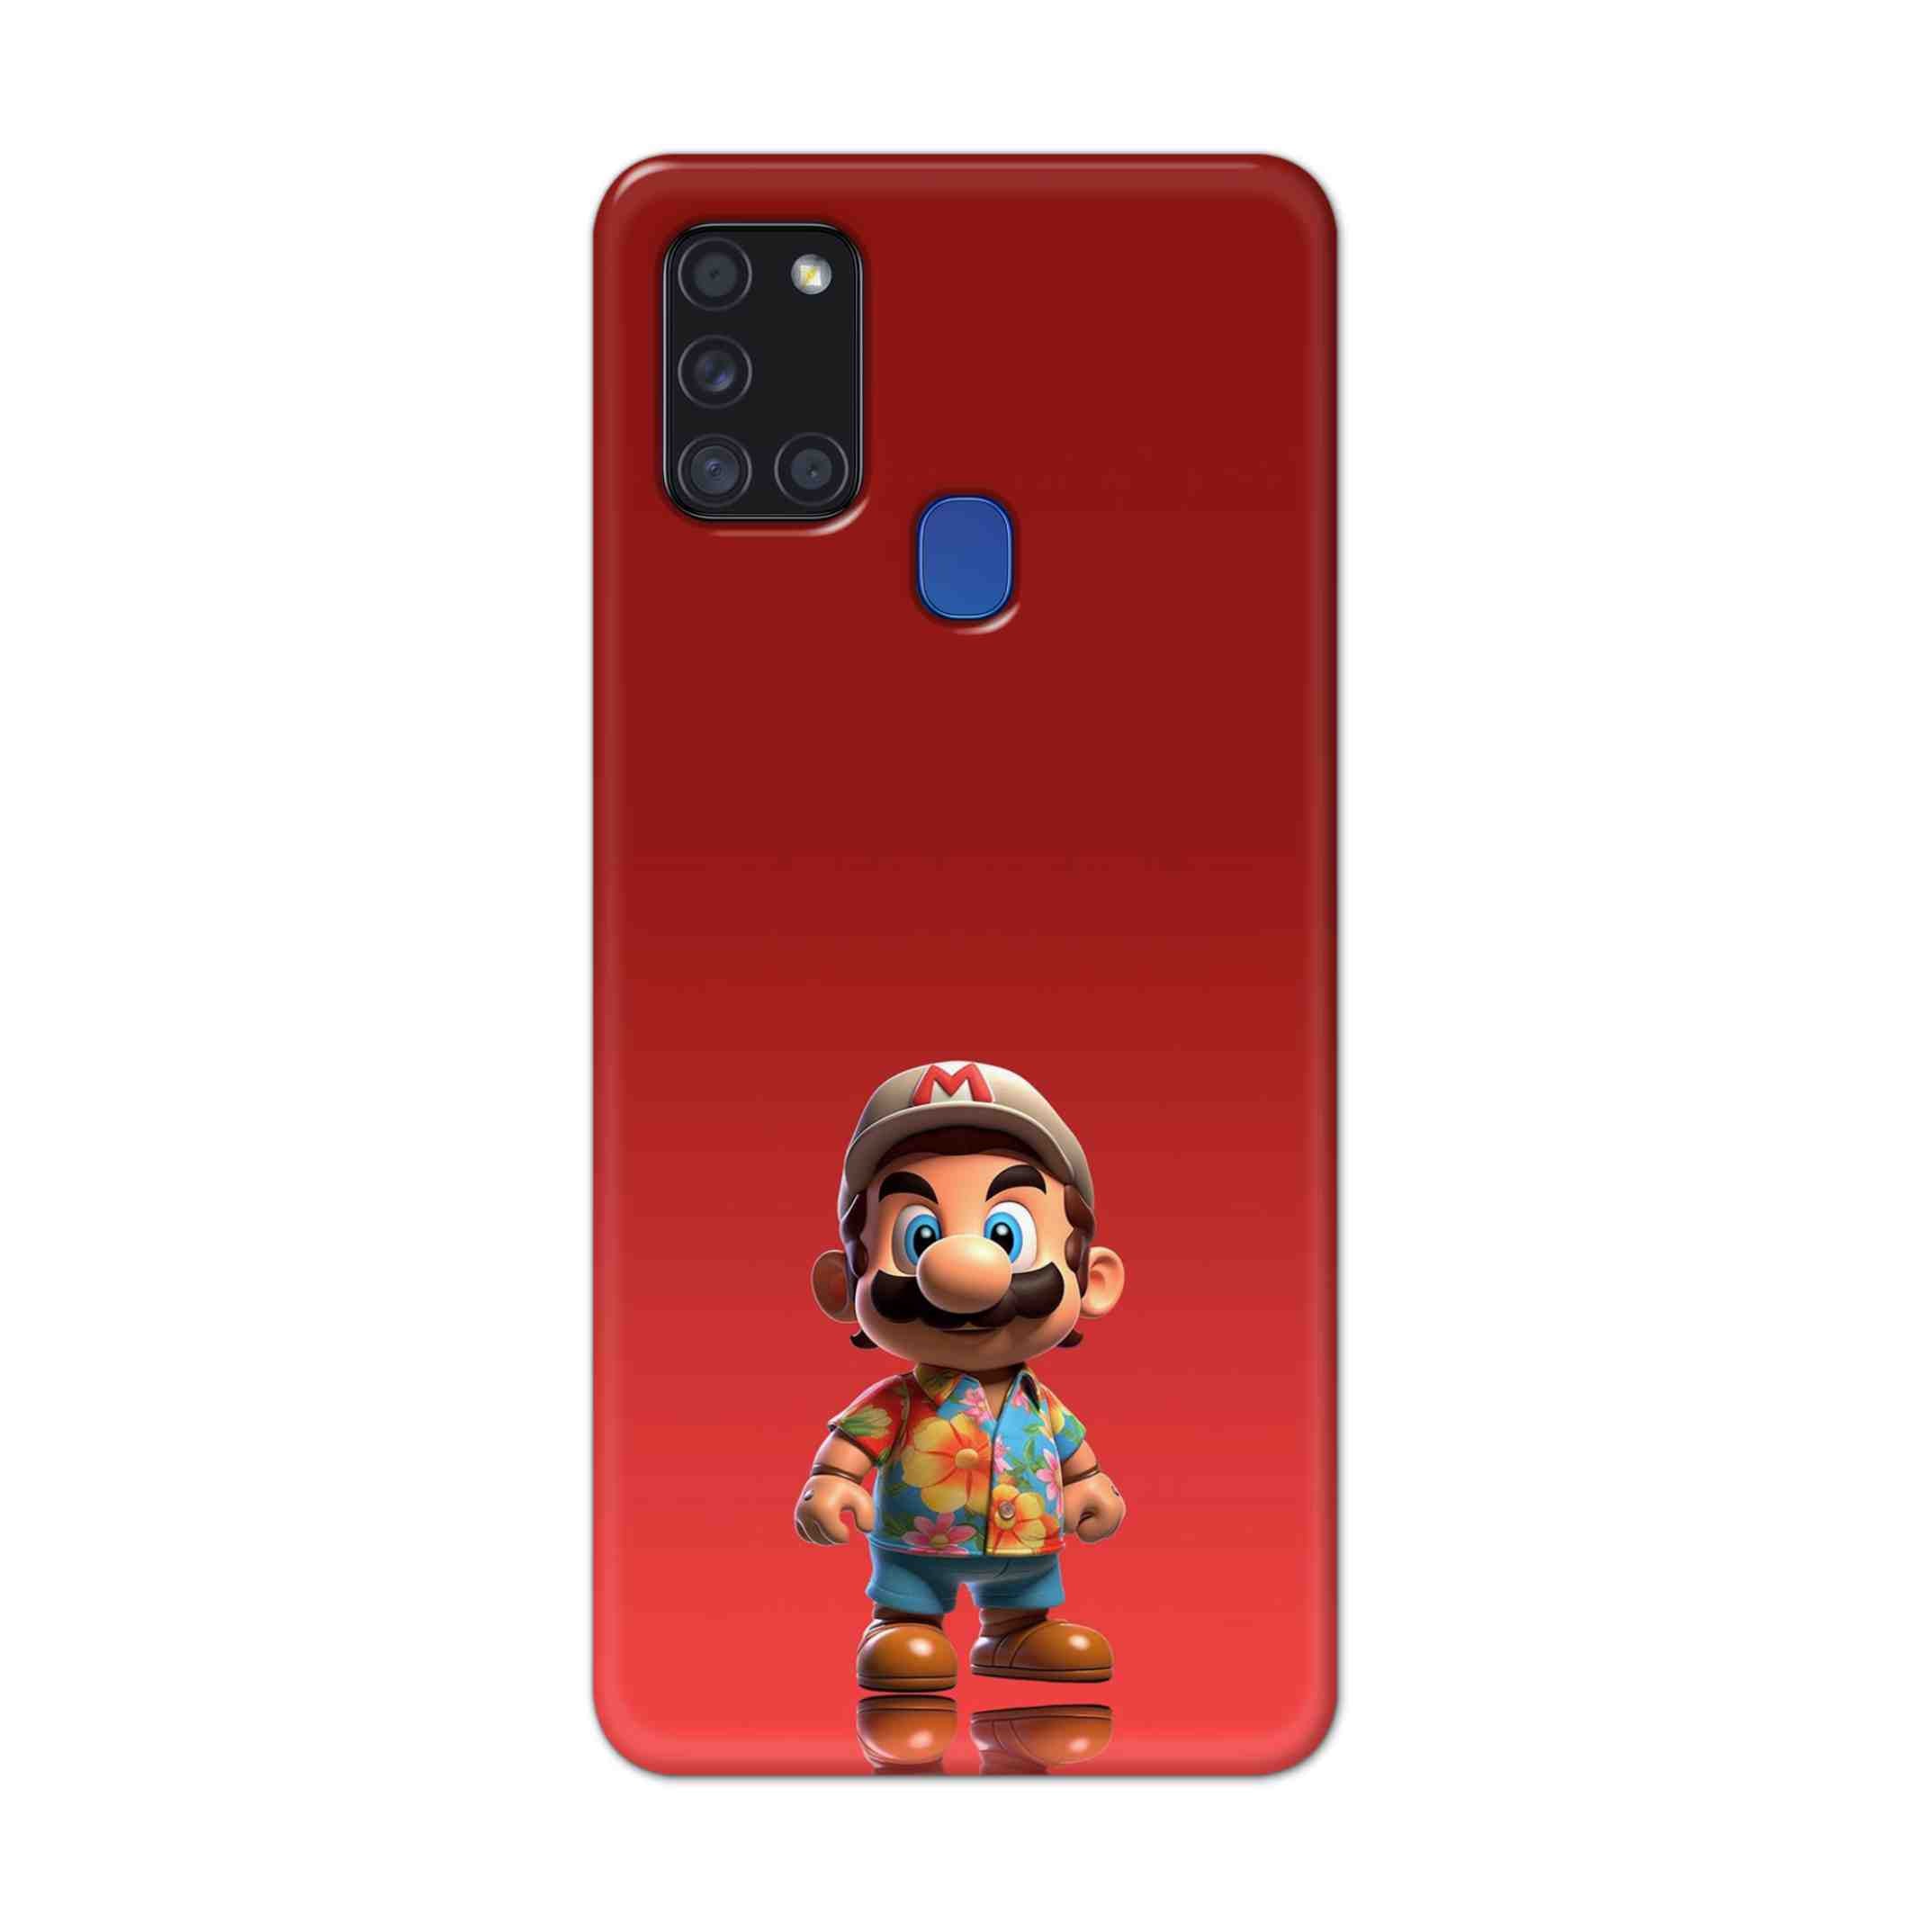 Buy Mario Hard Back Mobile Phone Case Cover For Samsung Galaxy A21s Online